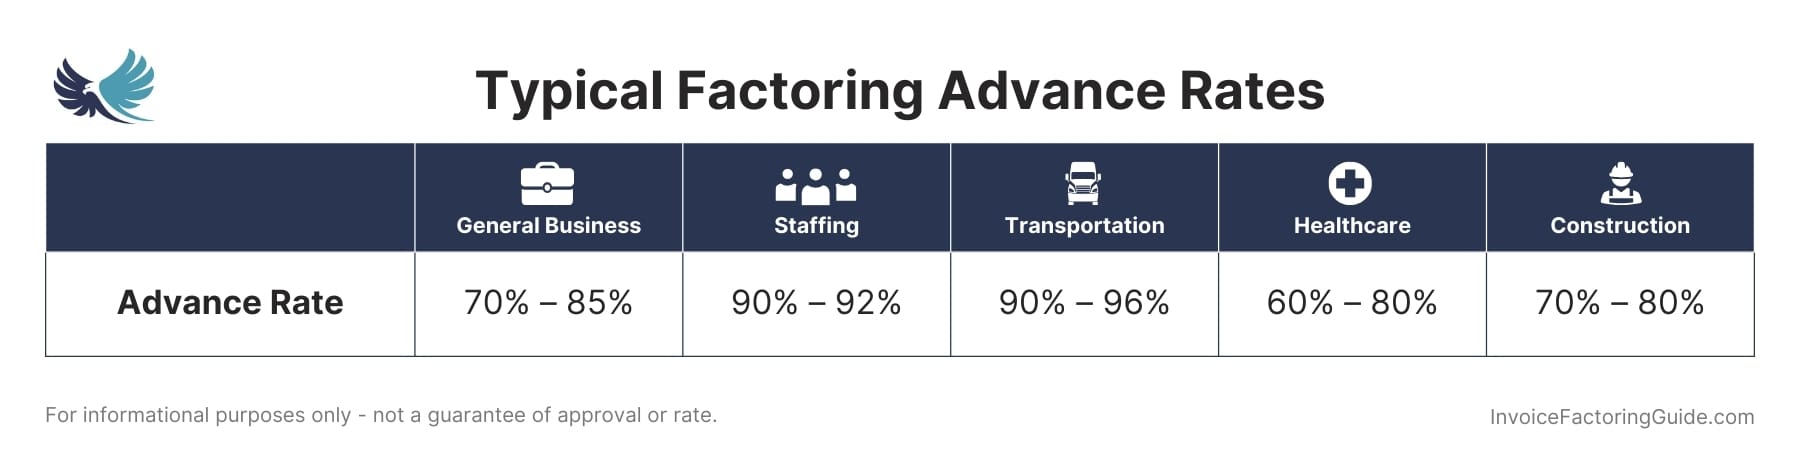 Typical Factoring Advance Rates